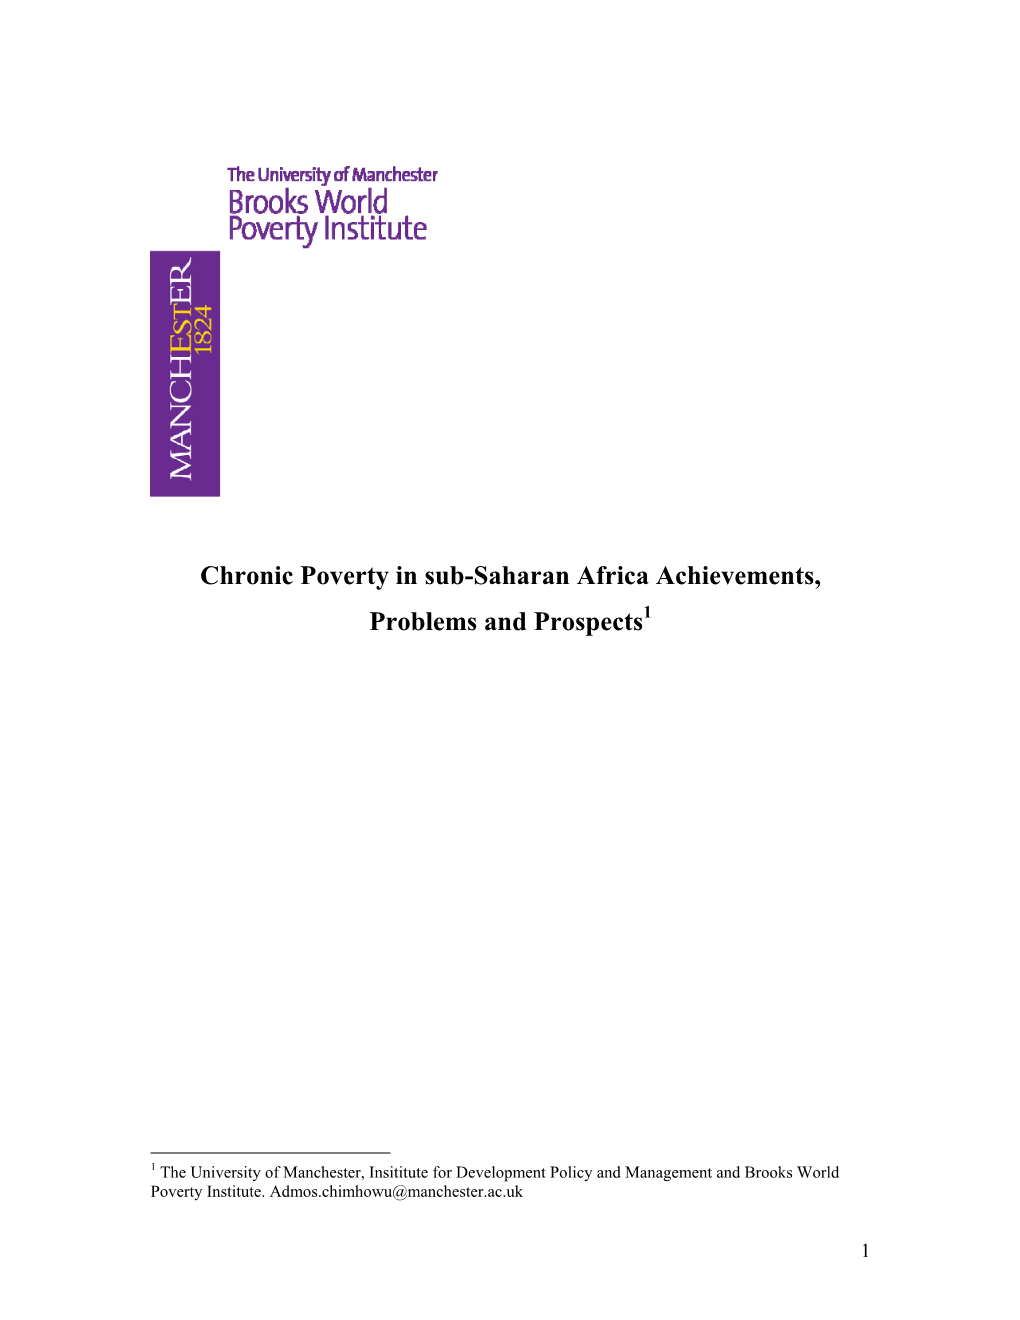 Chronic Poverty in Sub-Saharan Africa Achievements, Problems and Prospects1